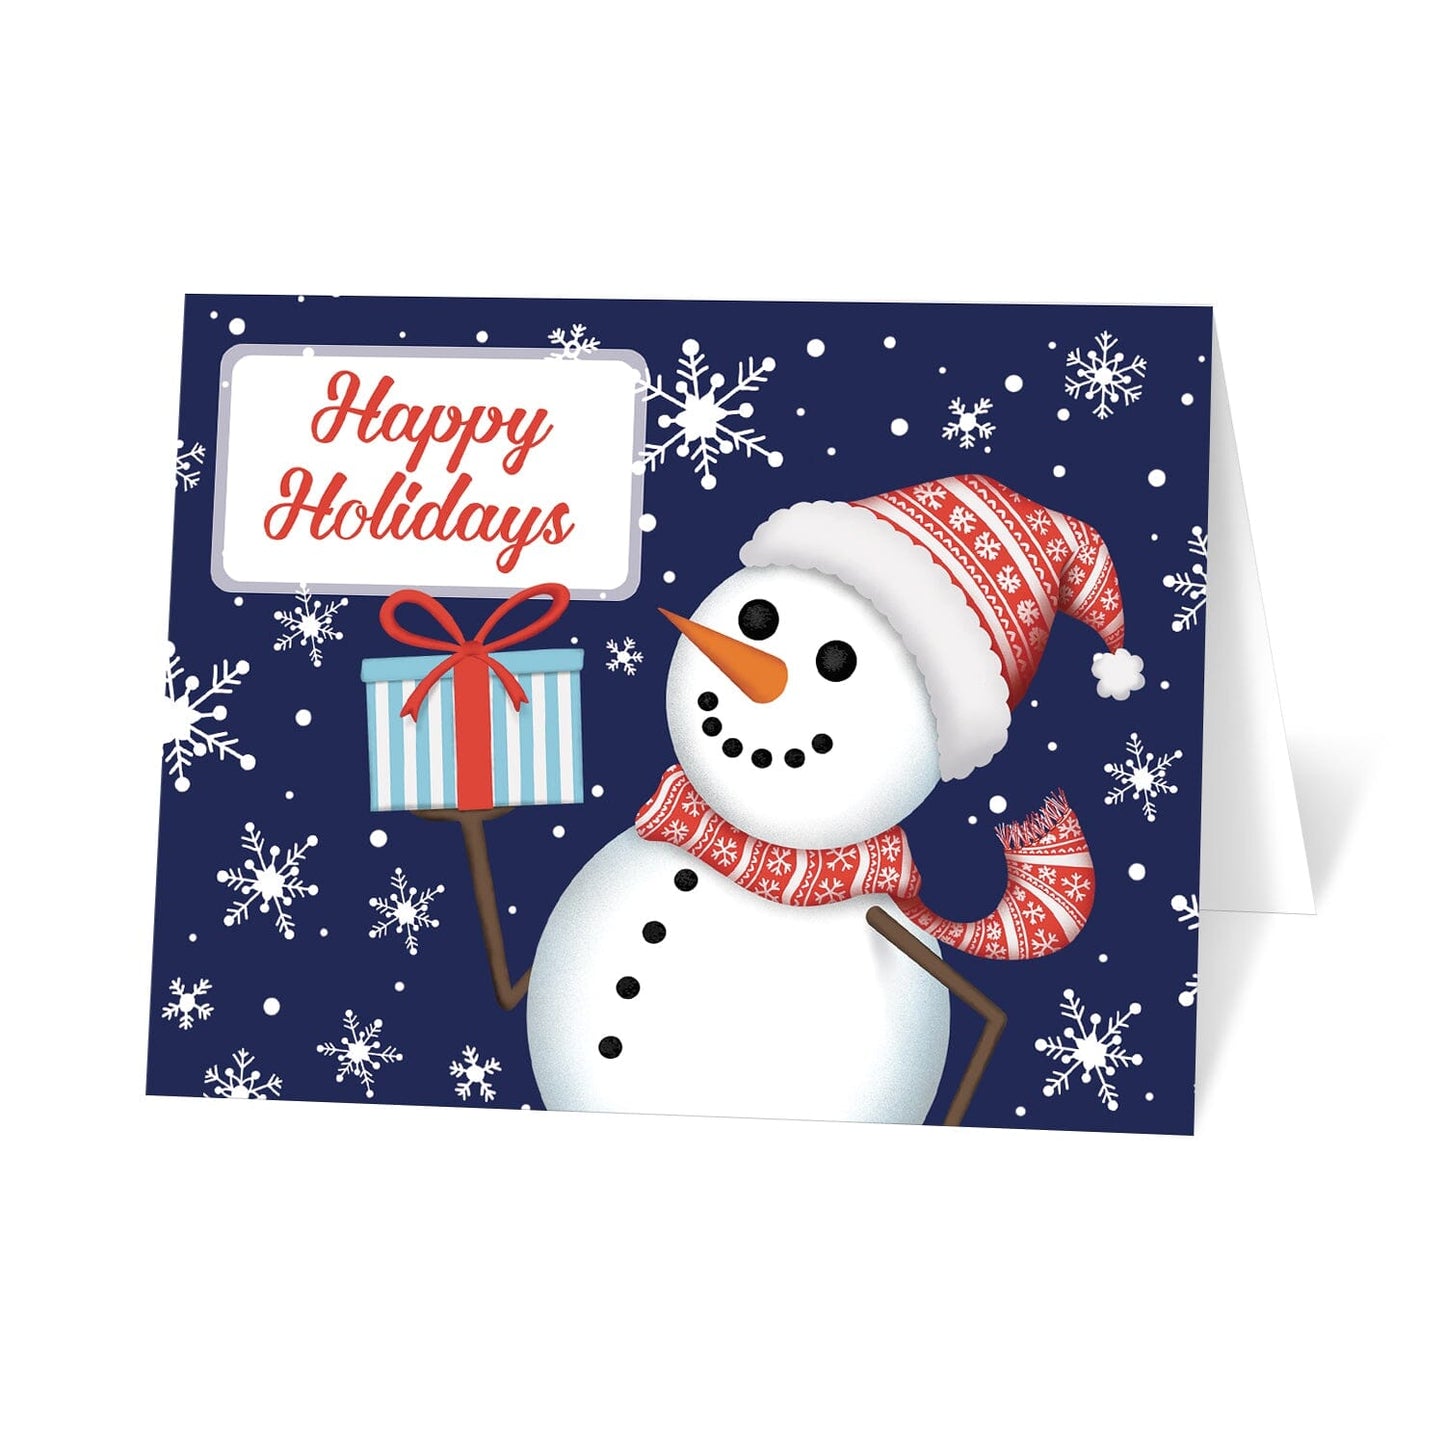 Winter Snowman Happy Holidays Christmas Cards at Artistically Invited.  These cards are designed with an illustration of a cute happy snowman wearing a red hat and scarf and holding a blue present. "Happy Holidays" is printed on the front of the cards in a red script font in a white frame over a snowing blue night sky with white snowflakes falling. 